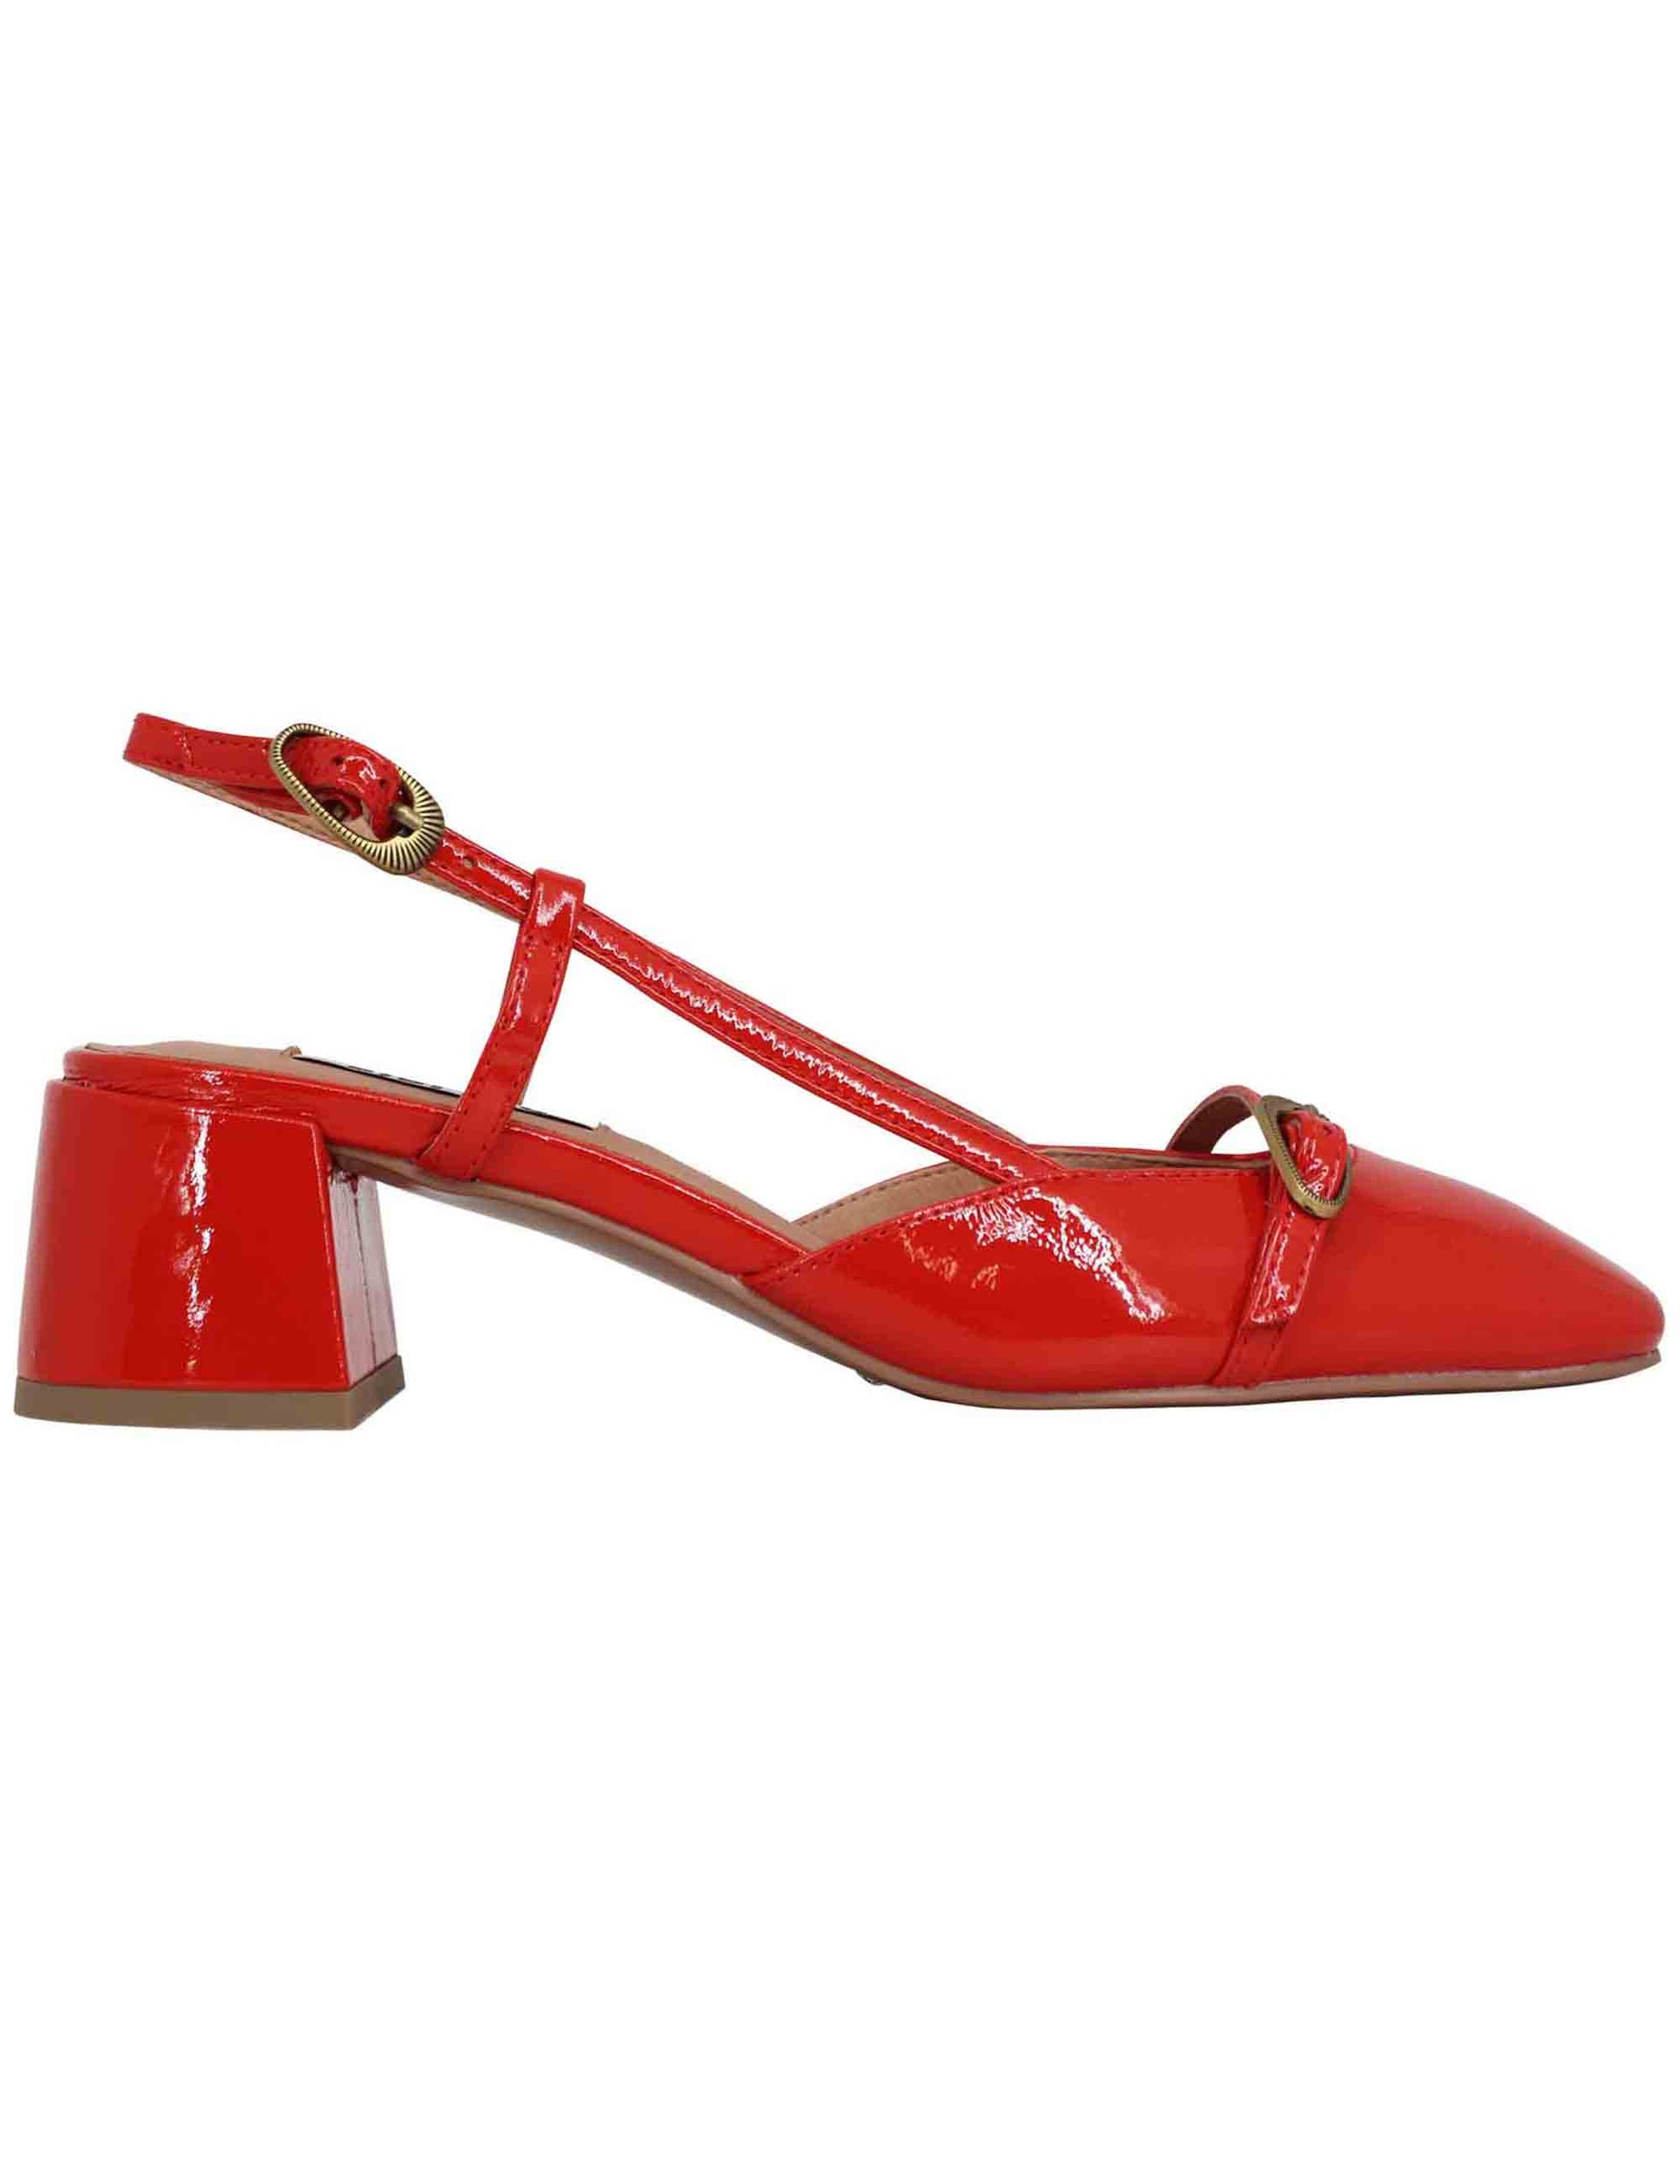 Women's slingback pumps in red patent leather with Patty buckle